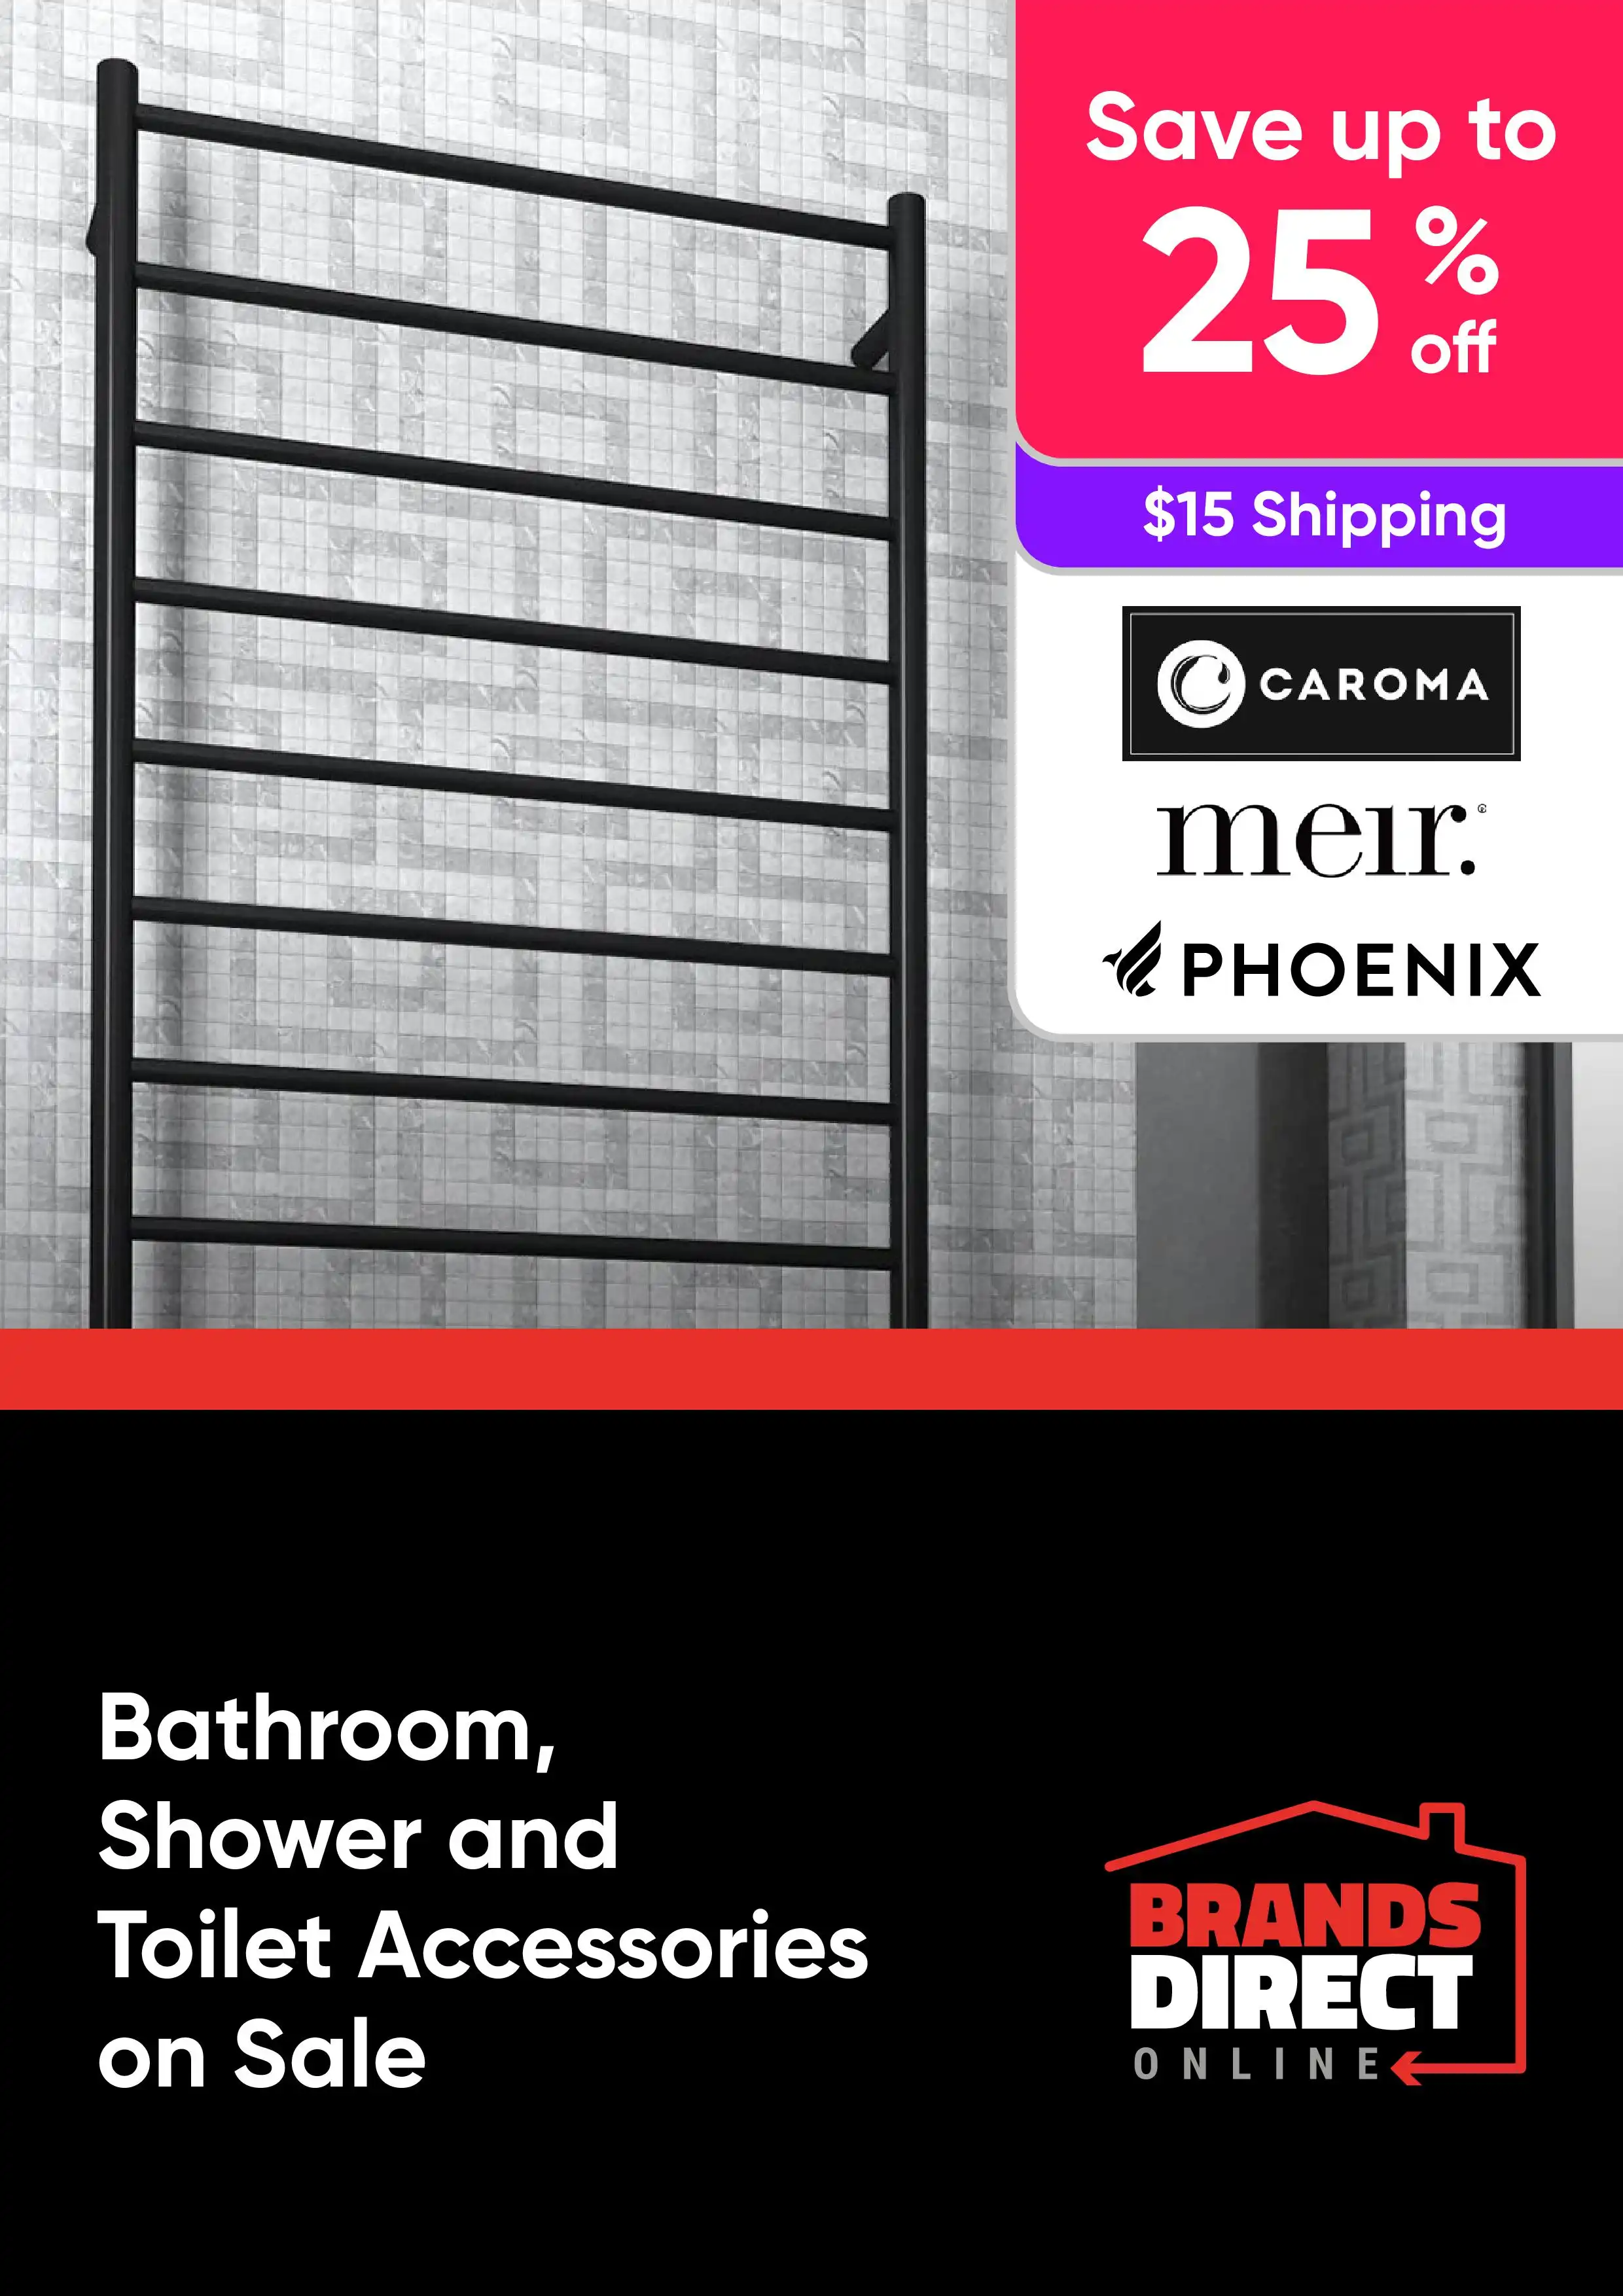 Save up to 25% On A Huge Range of Bathroom, Shower and Toilet Accessories